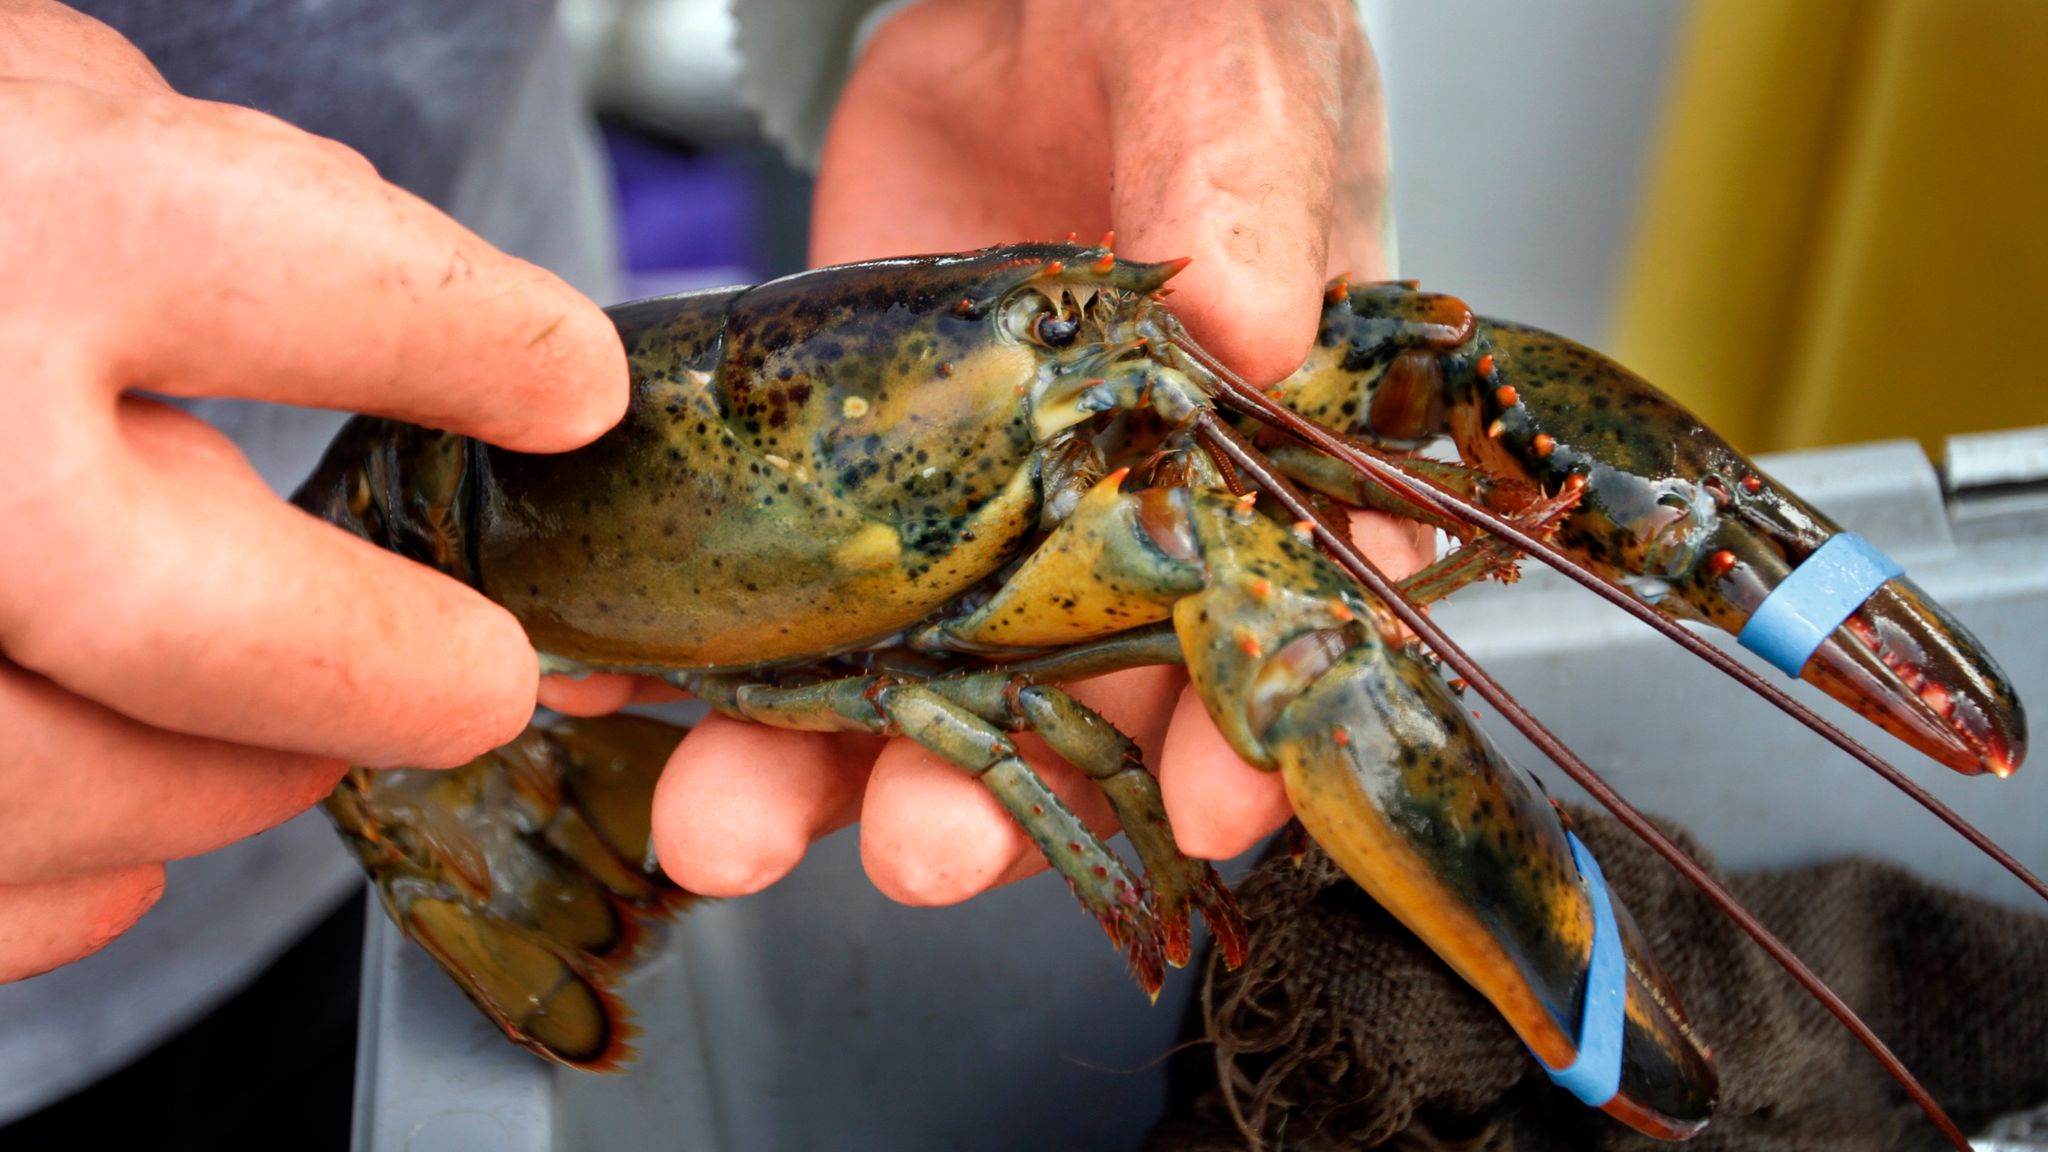 Boiling lobsters alive could be banned under new animal welfare laws | UK  News | Sky News